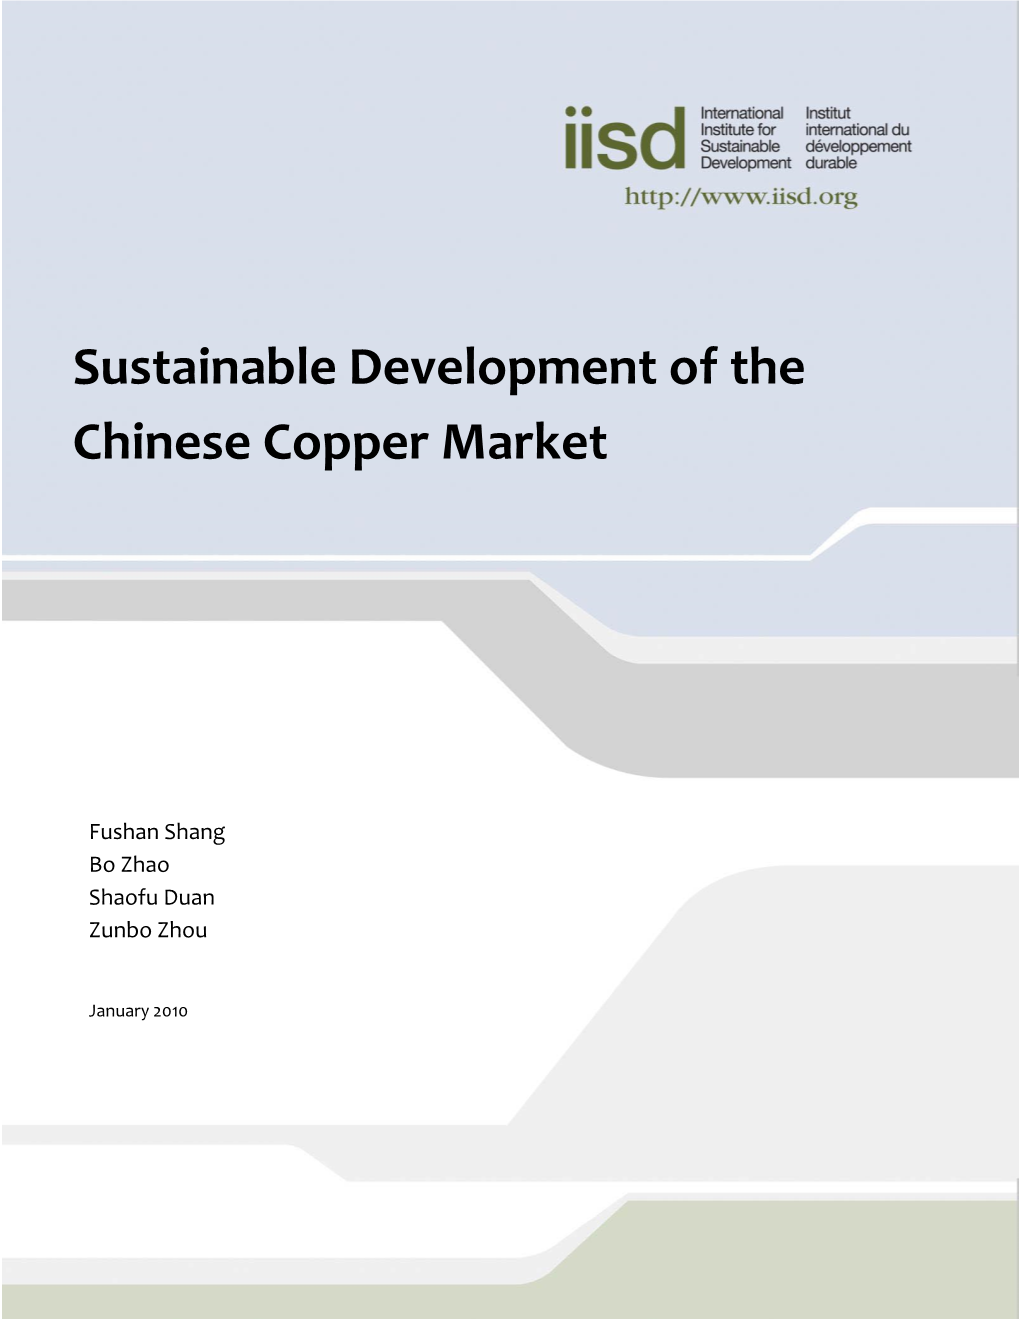 Sustainable Development of the Chinese Copper Market